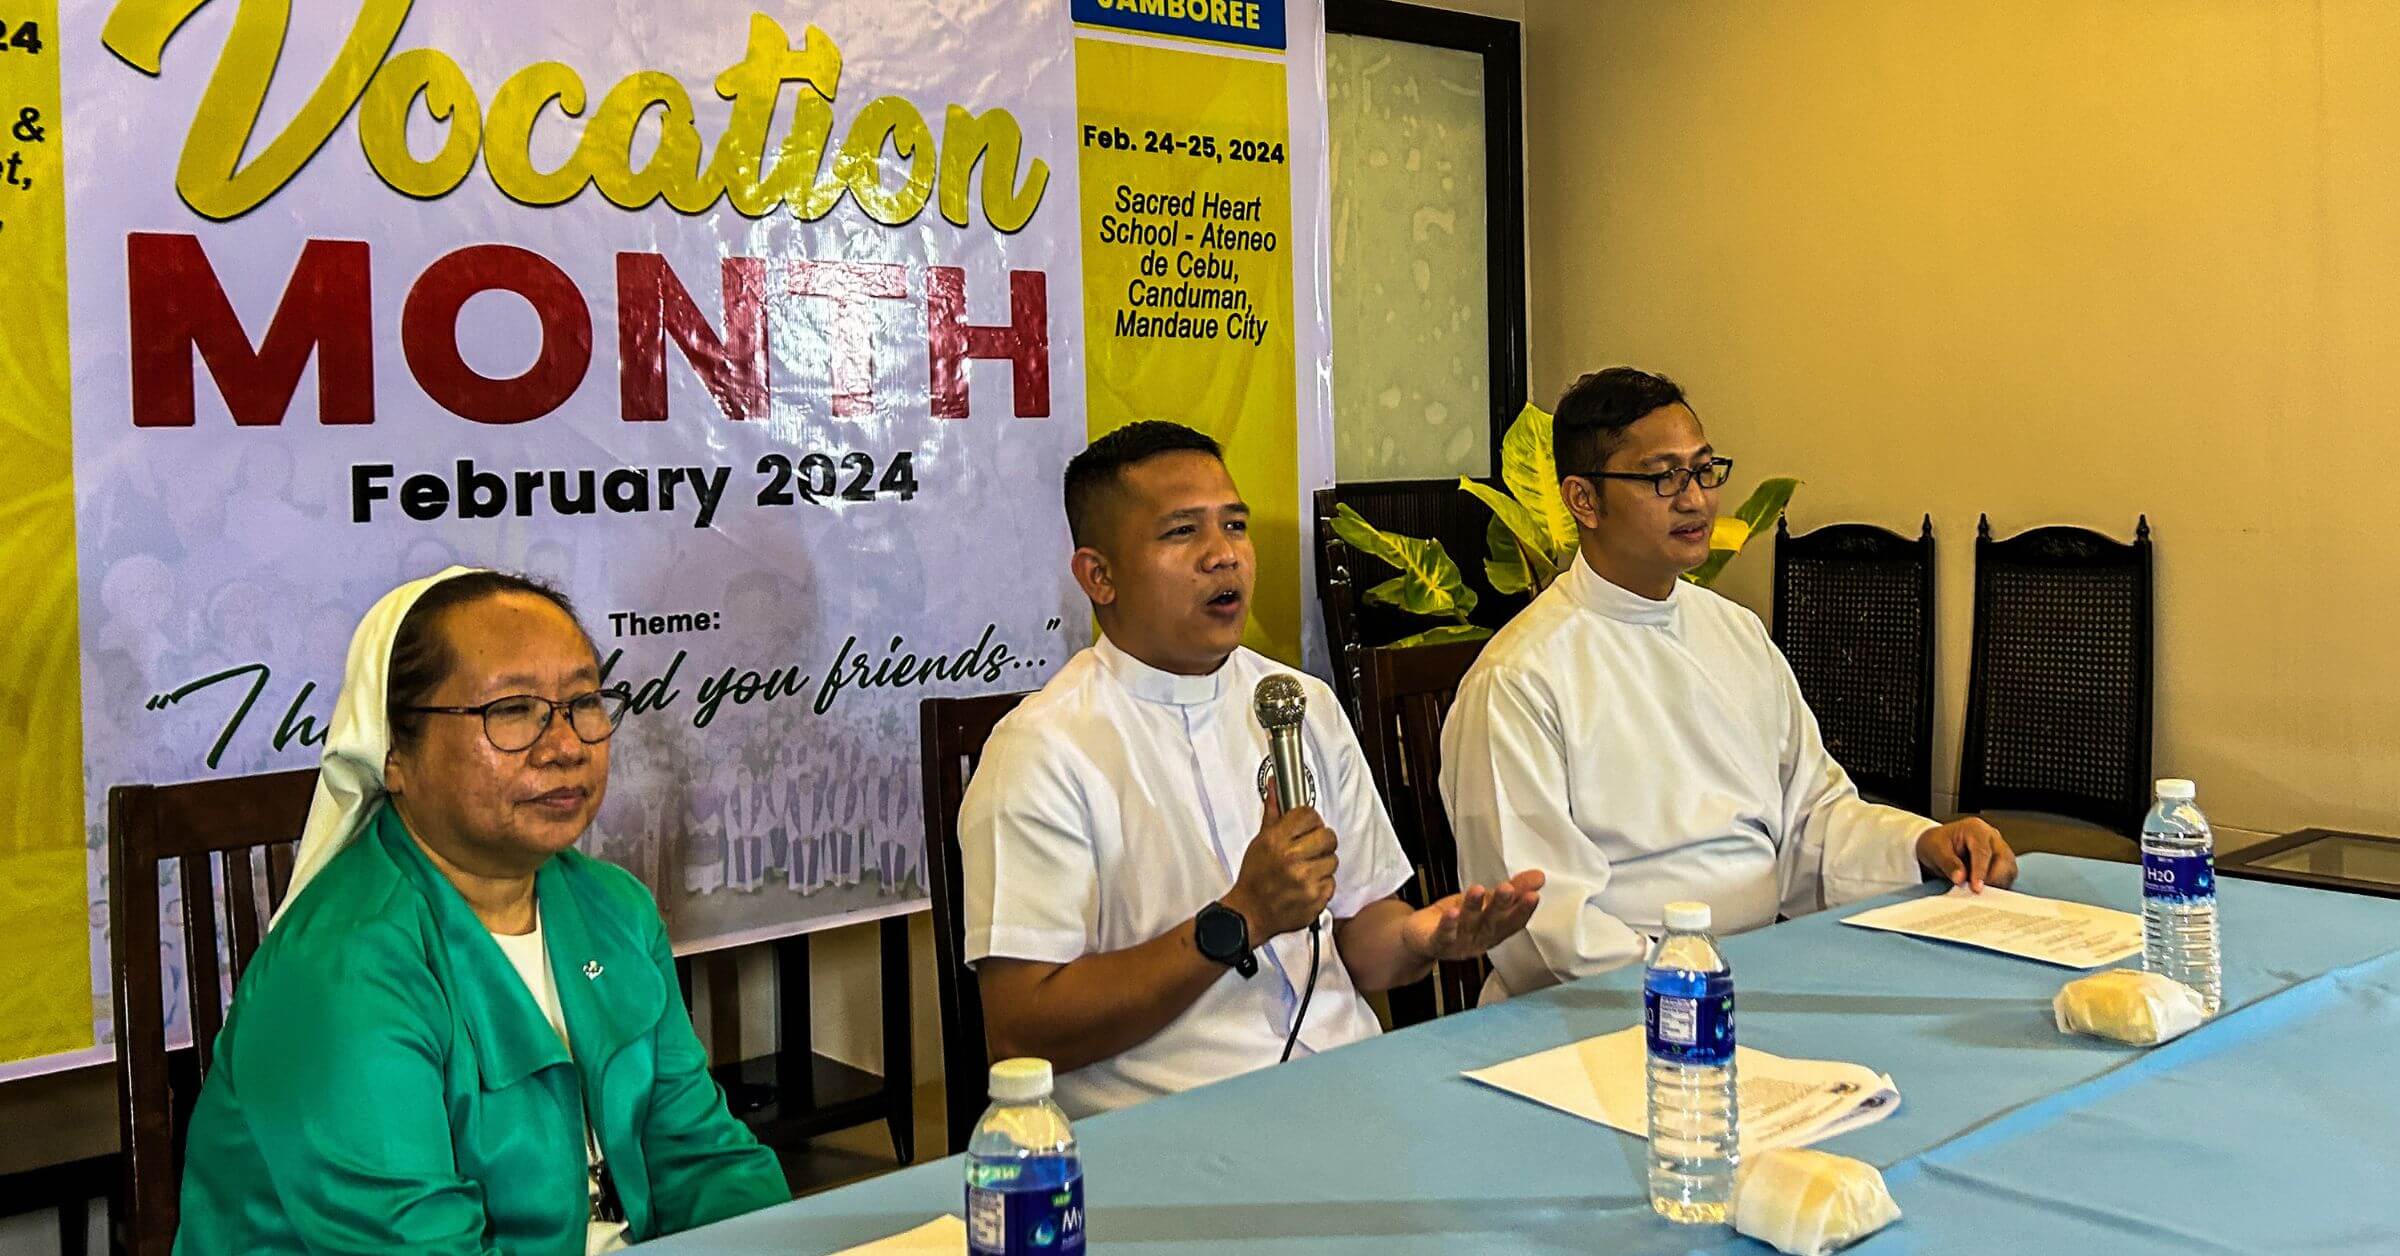 VOCATION MONTH. Announcing the activities for the Vocation Month in the Archdiocese of Cebu are (from left) Sr. Cecilia Tapang of Living the Gospel Community, Fr. Christian James Mayol of the Seminario Mayor de San Carlos, and Fr. Ferderiz Cantiller, President of the Directors of Vocations in the Philippines (DVP) Cebu.